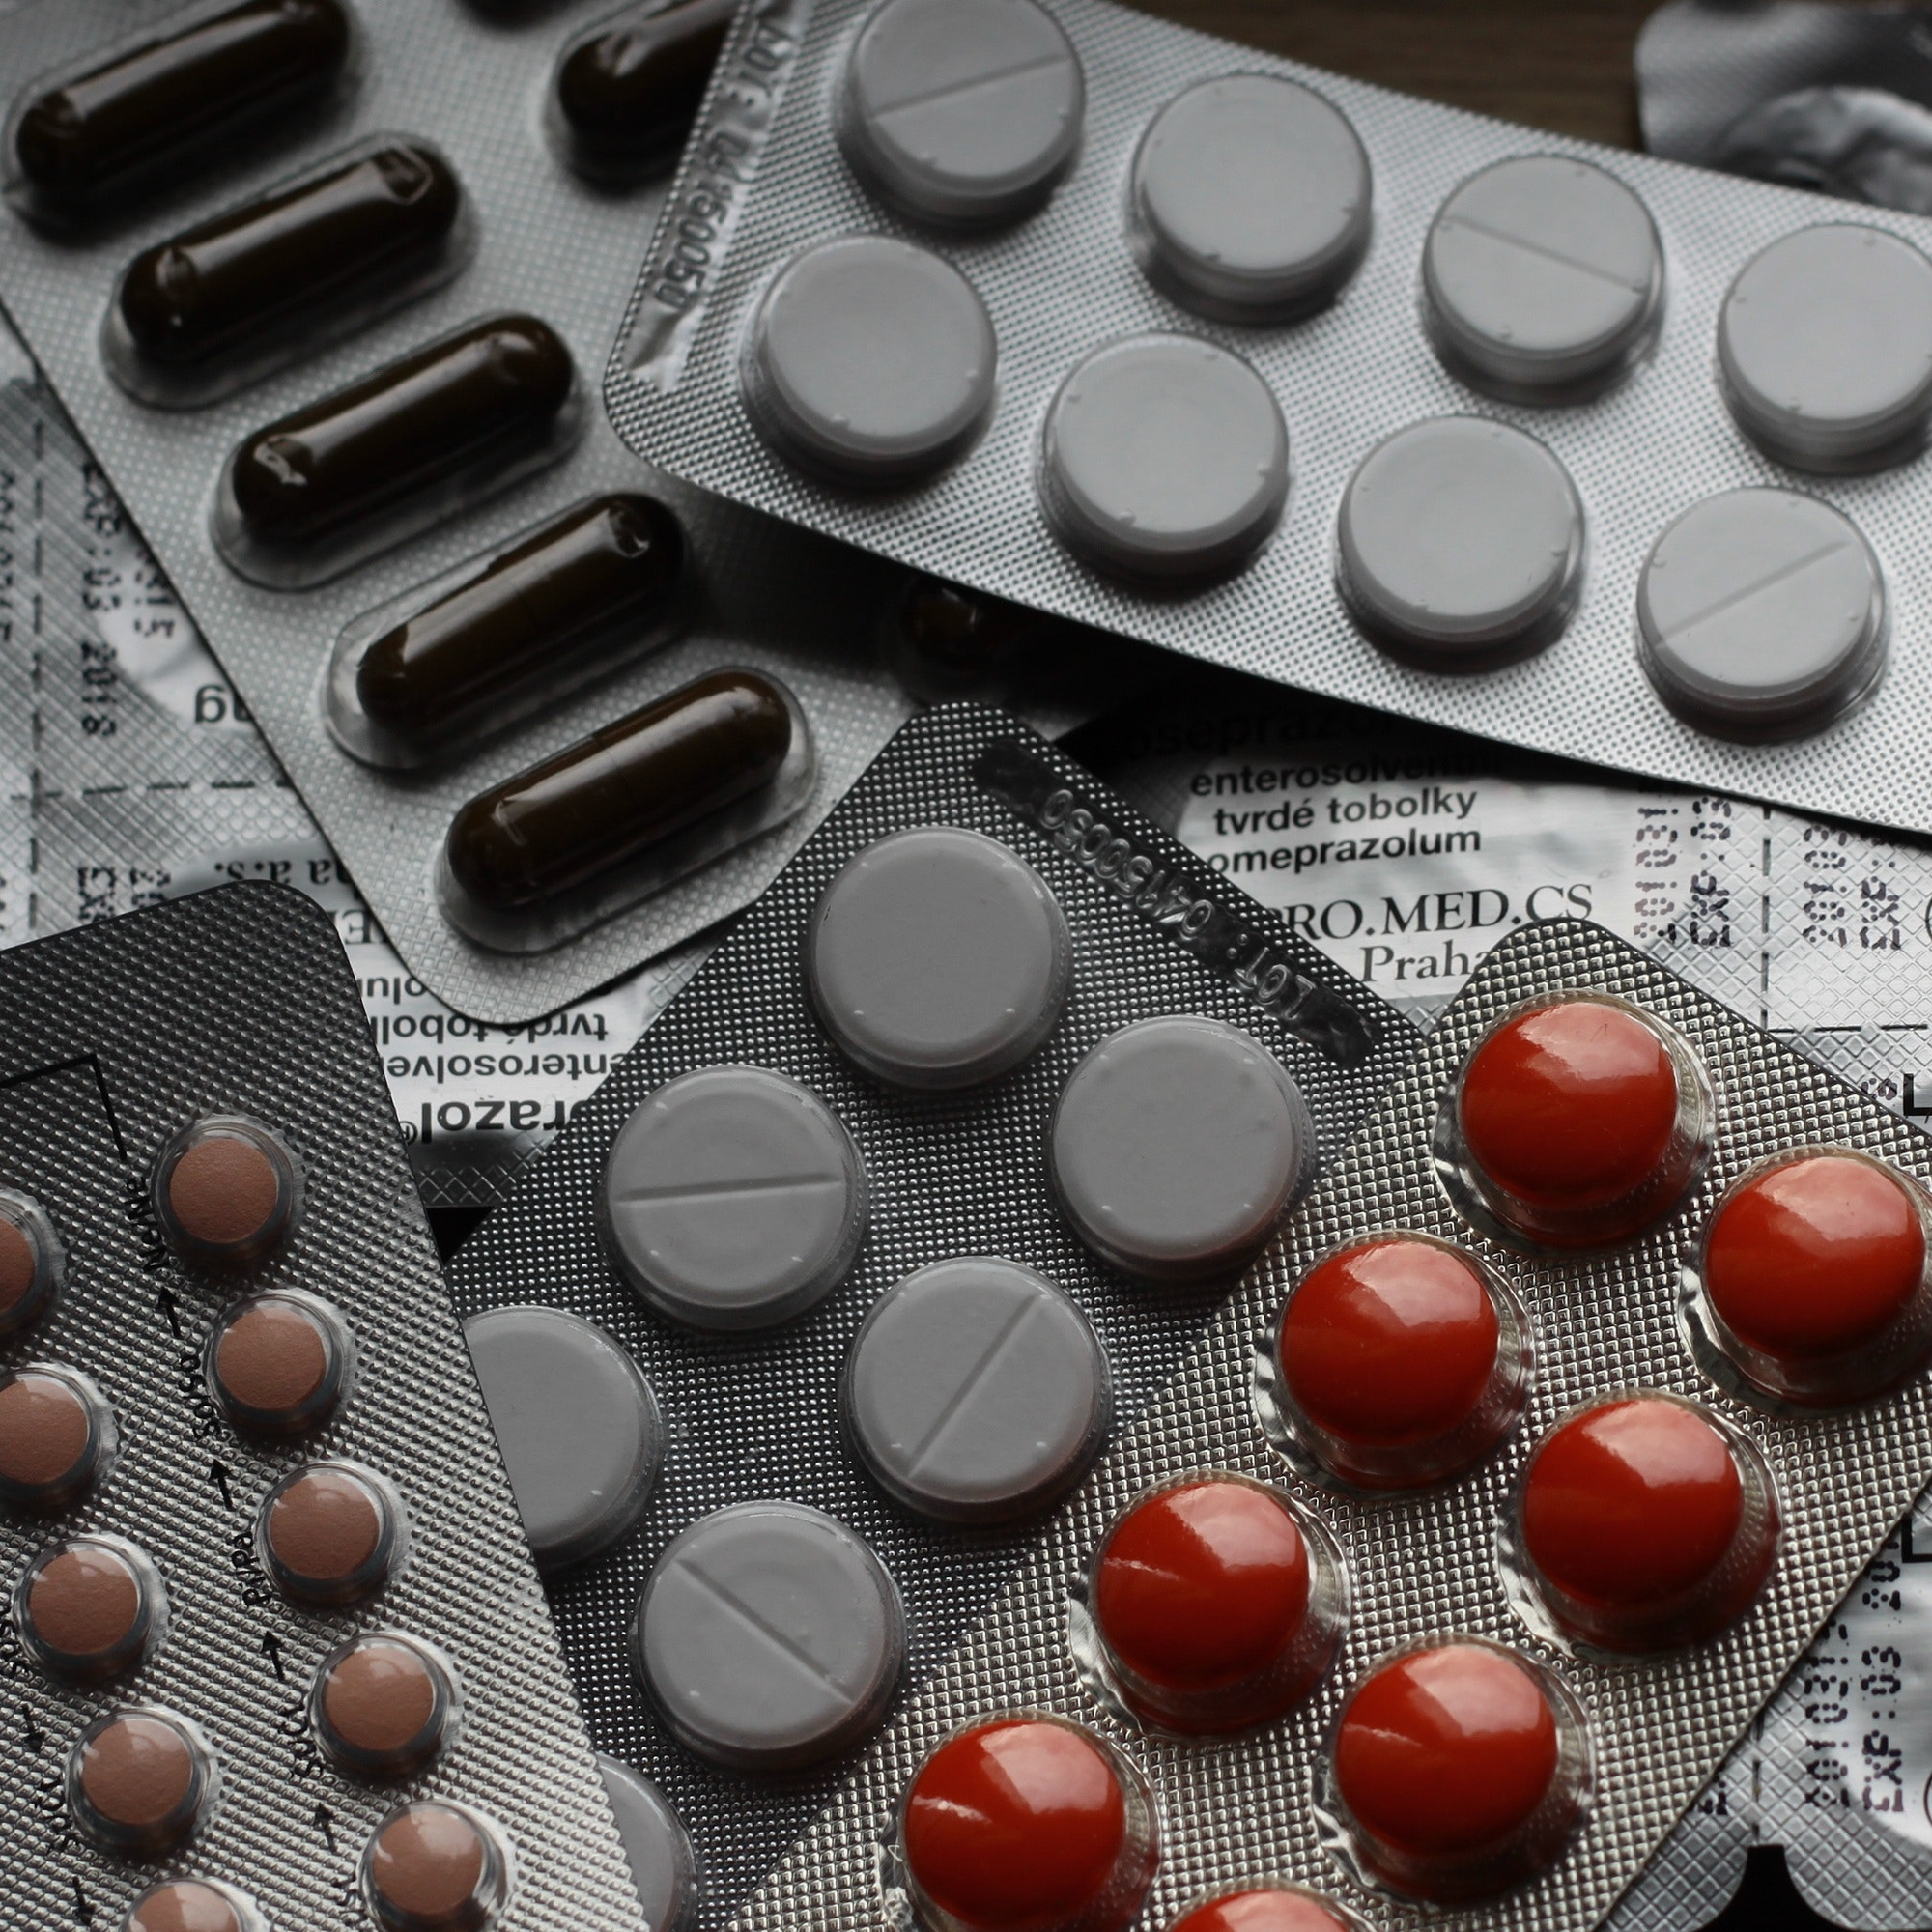 How can you protect your stomach when using NSAID painkillers?